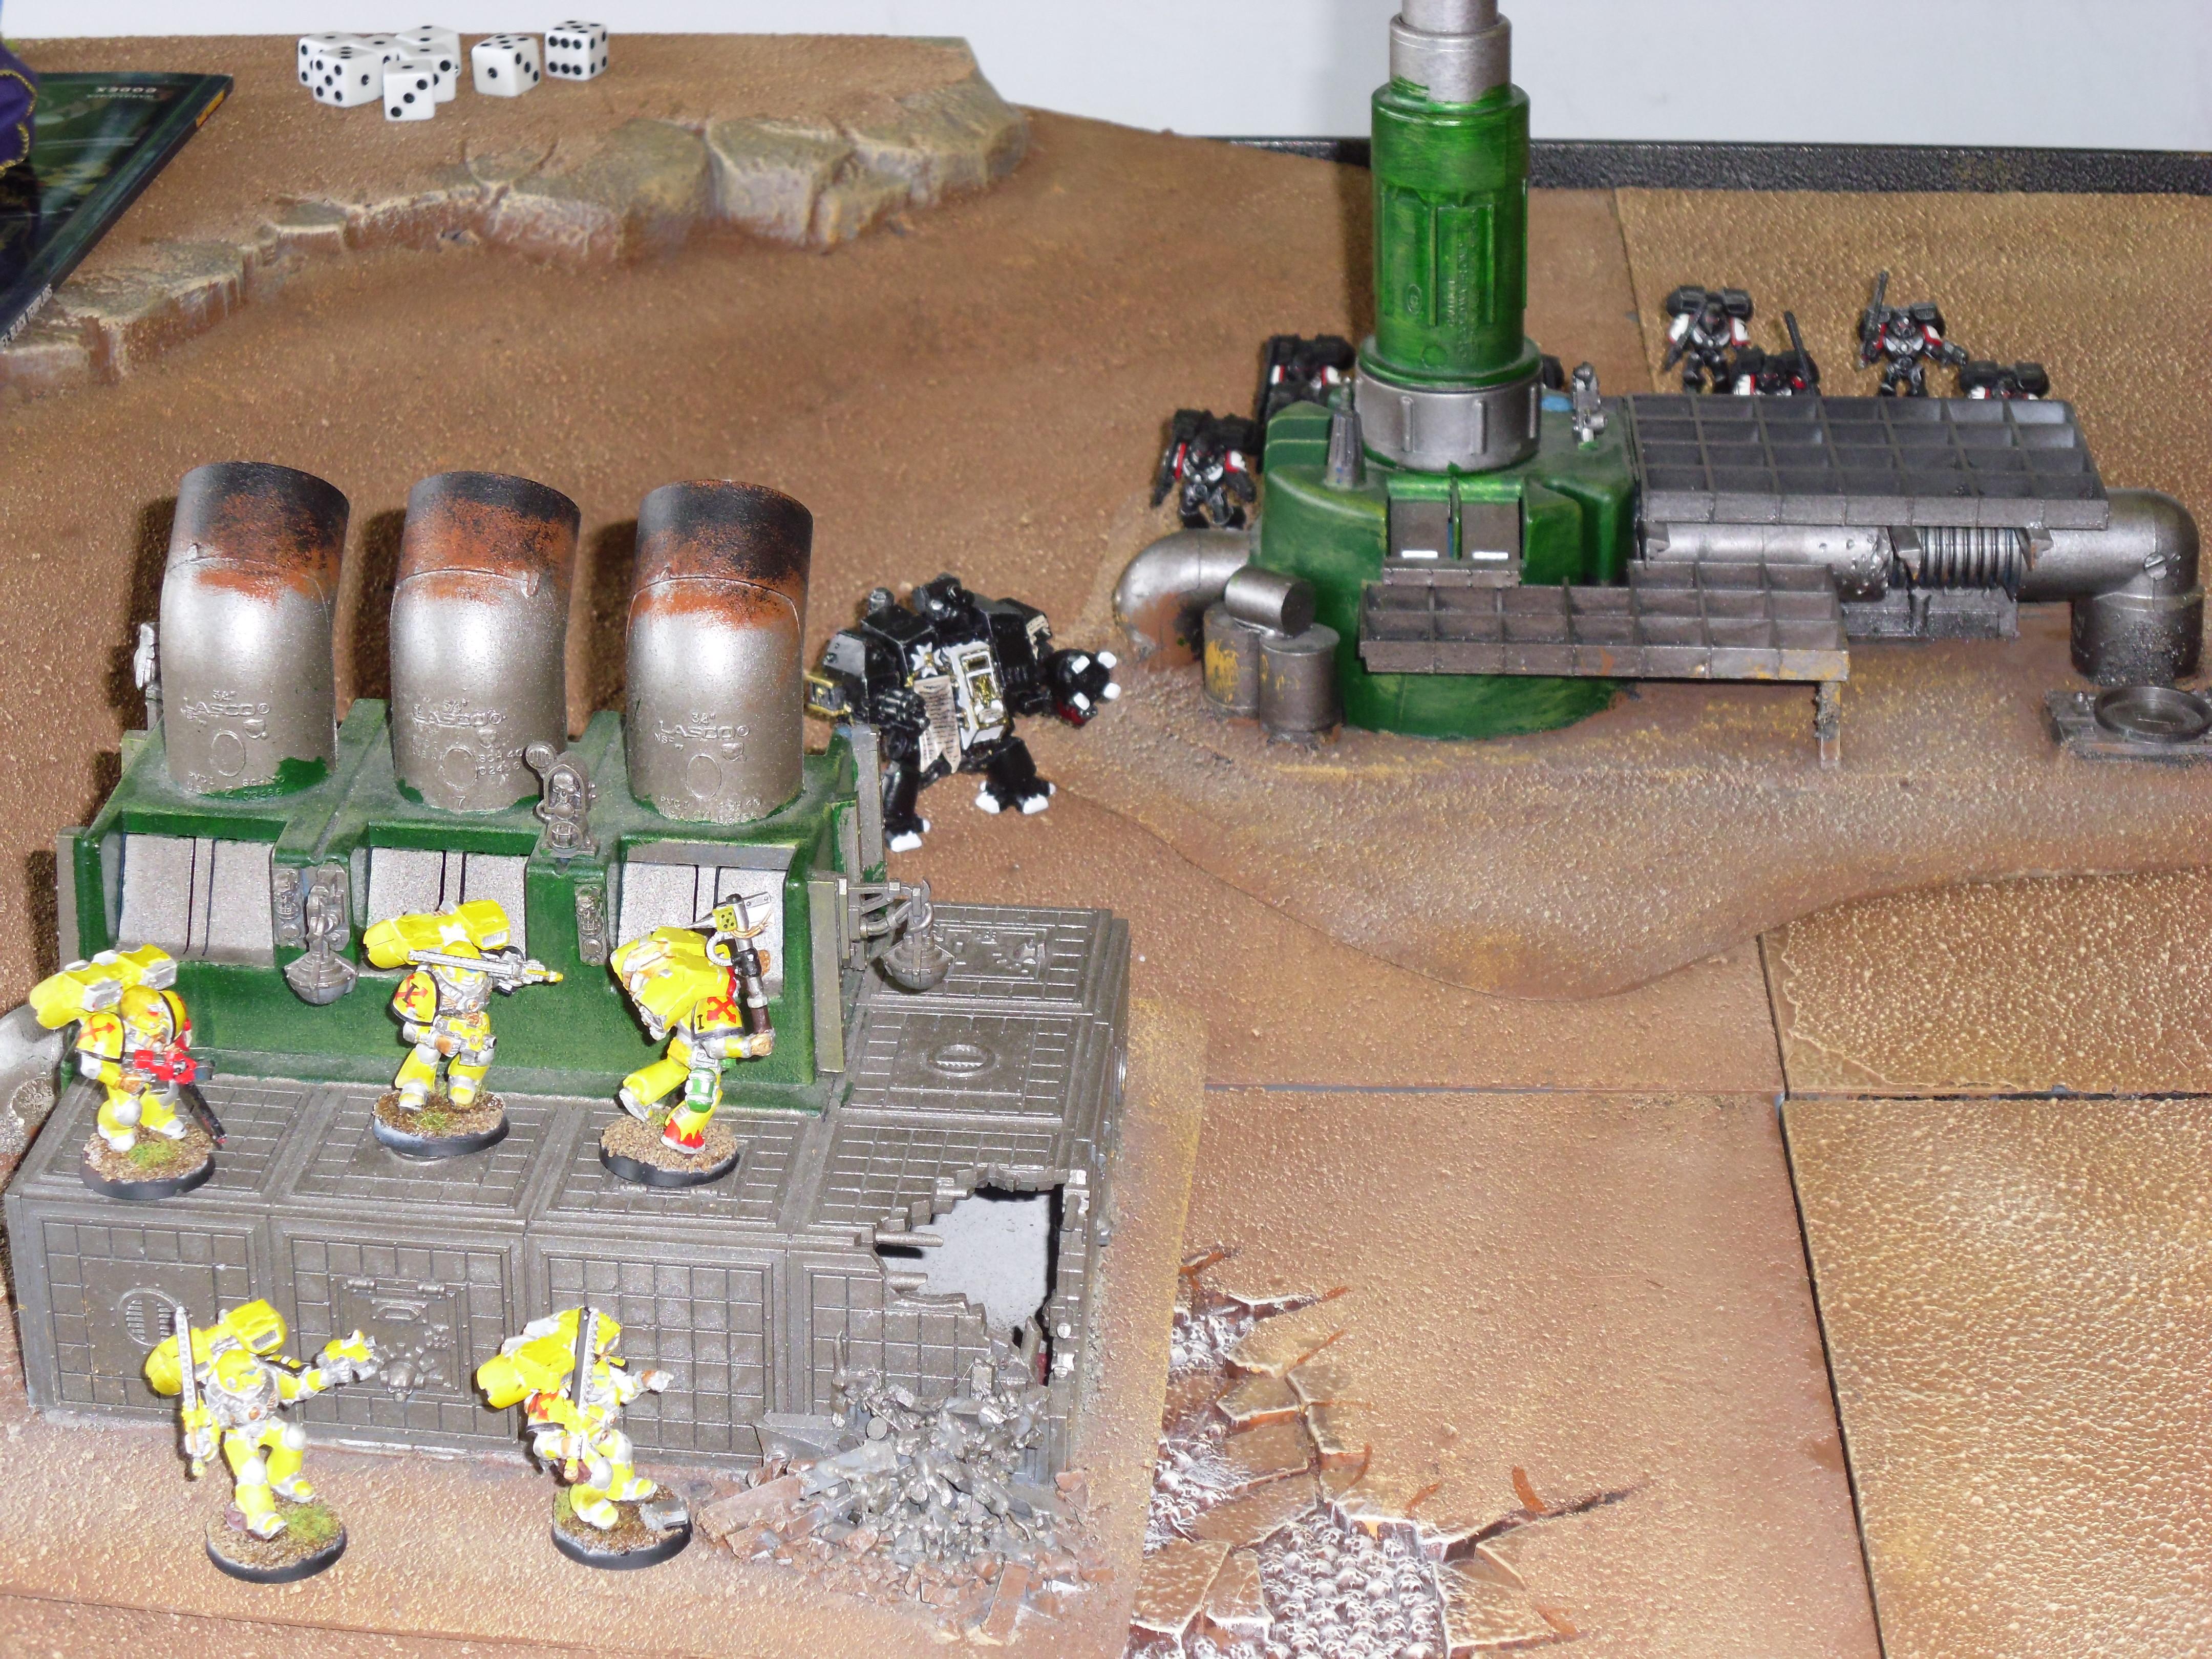 Battle Report, Black Templars, Dreadnought, Imperial Fists, Space Marines, Warhammer 40,000